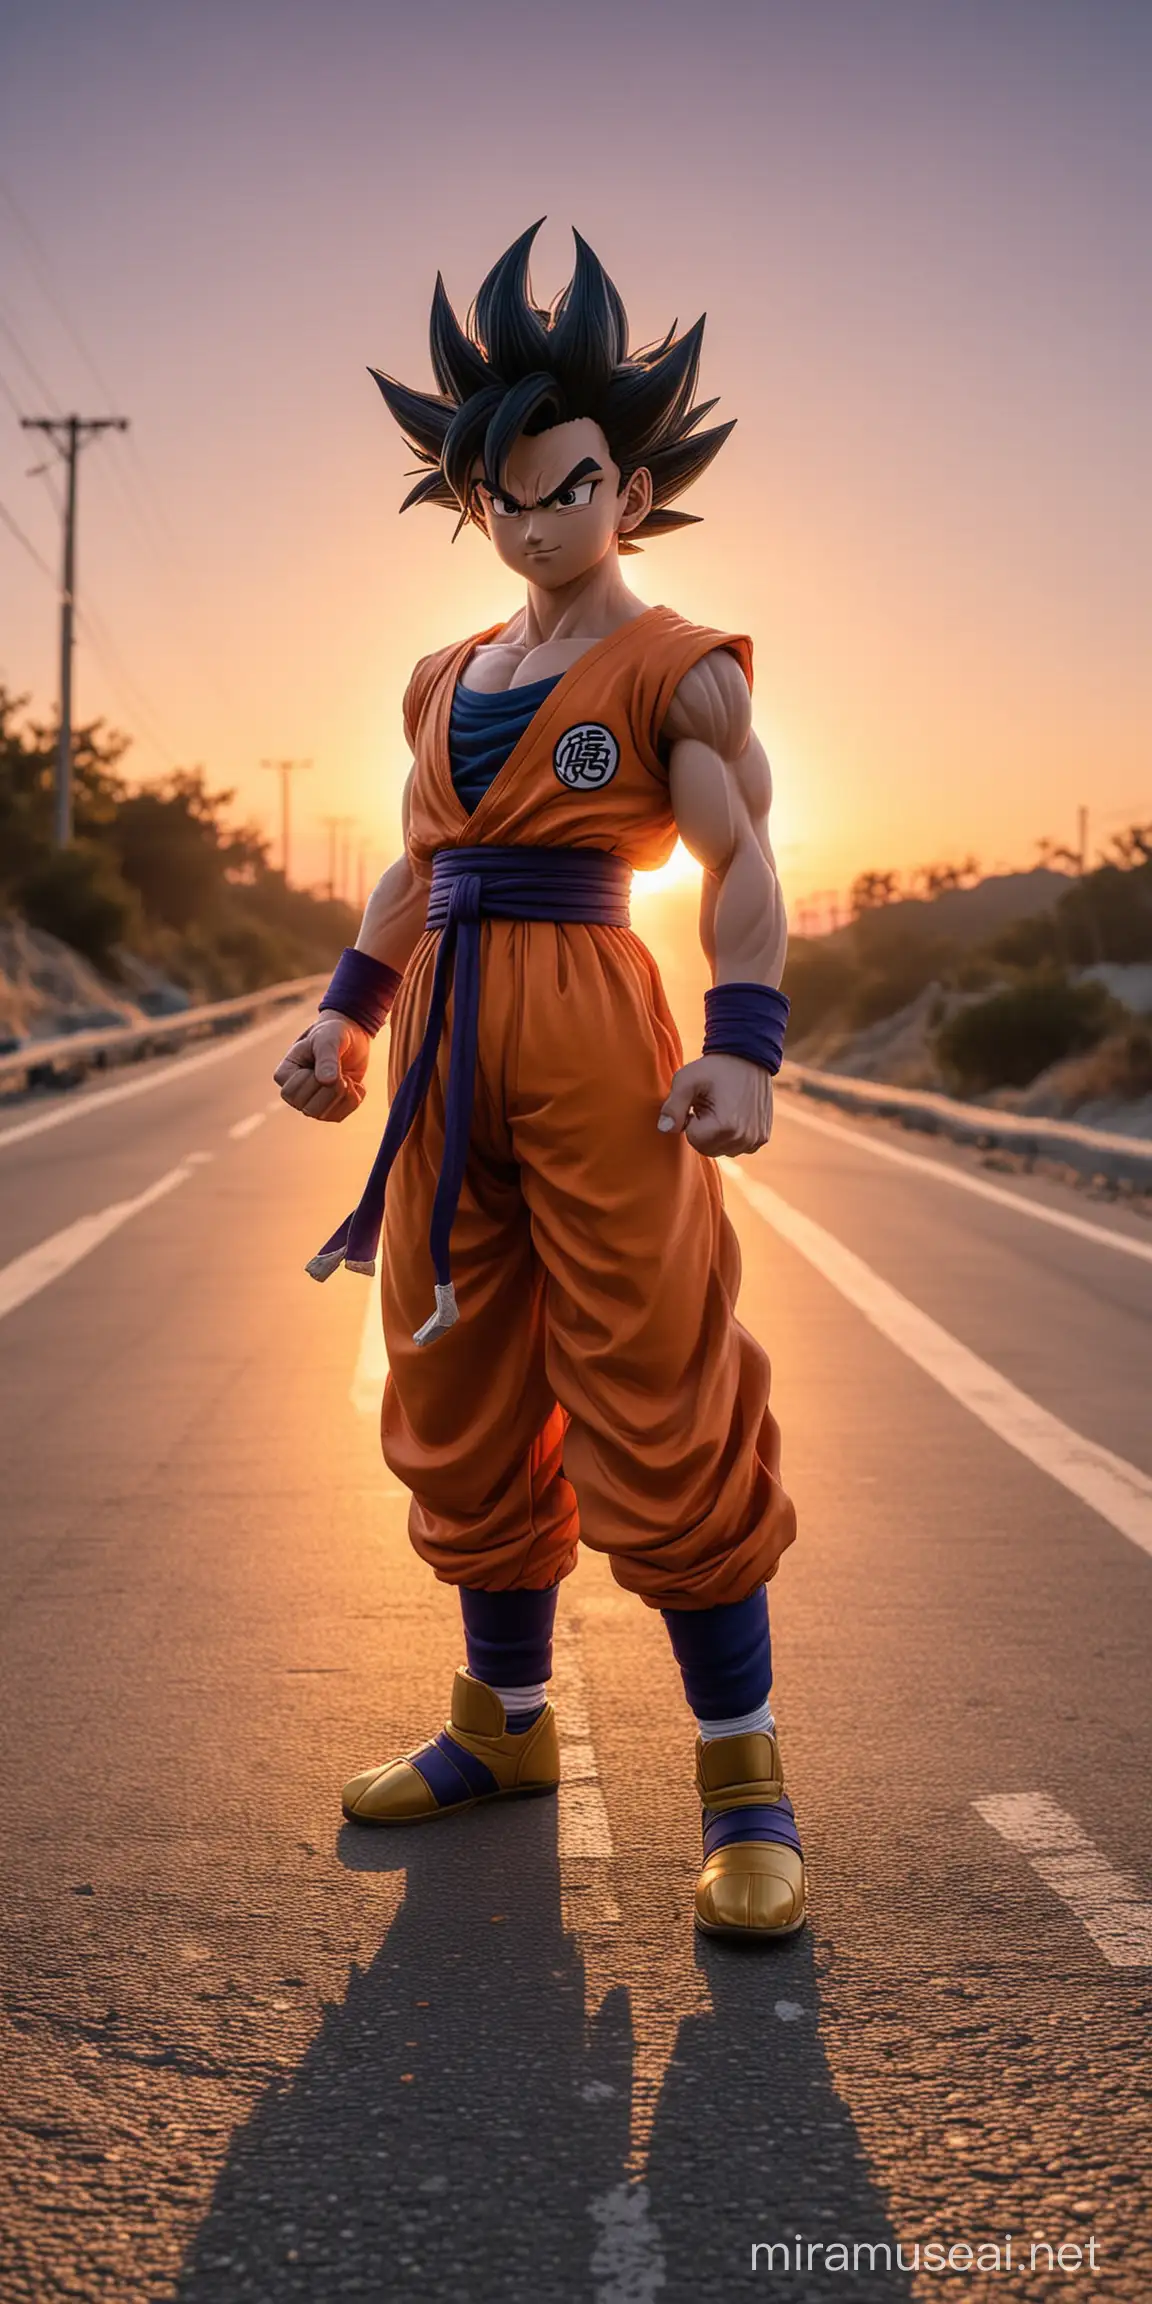 Gohan dragon ballz stand on the road with clear sunset background